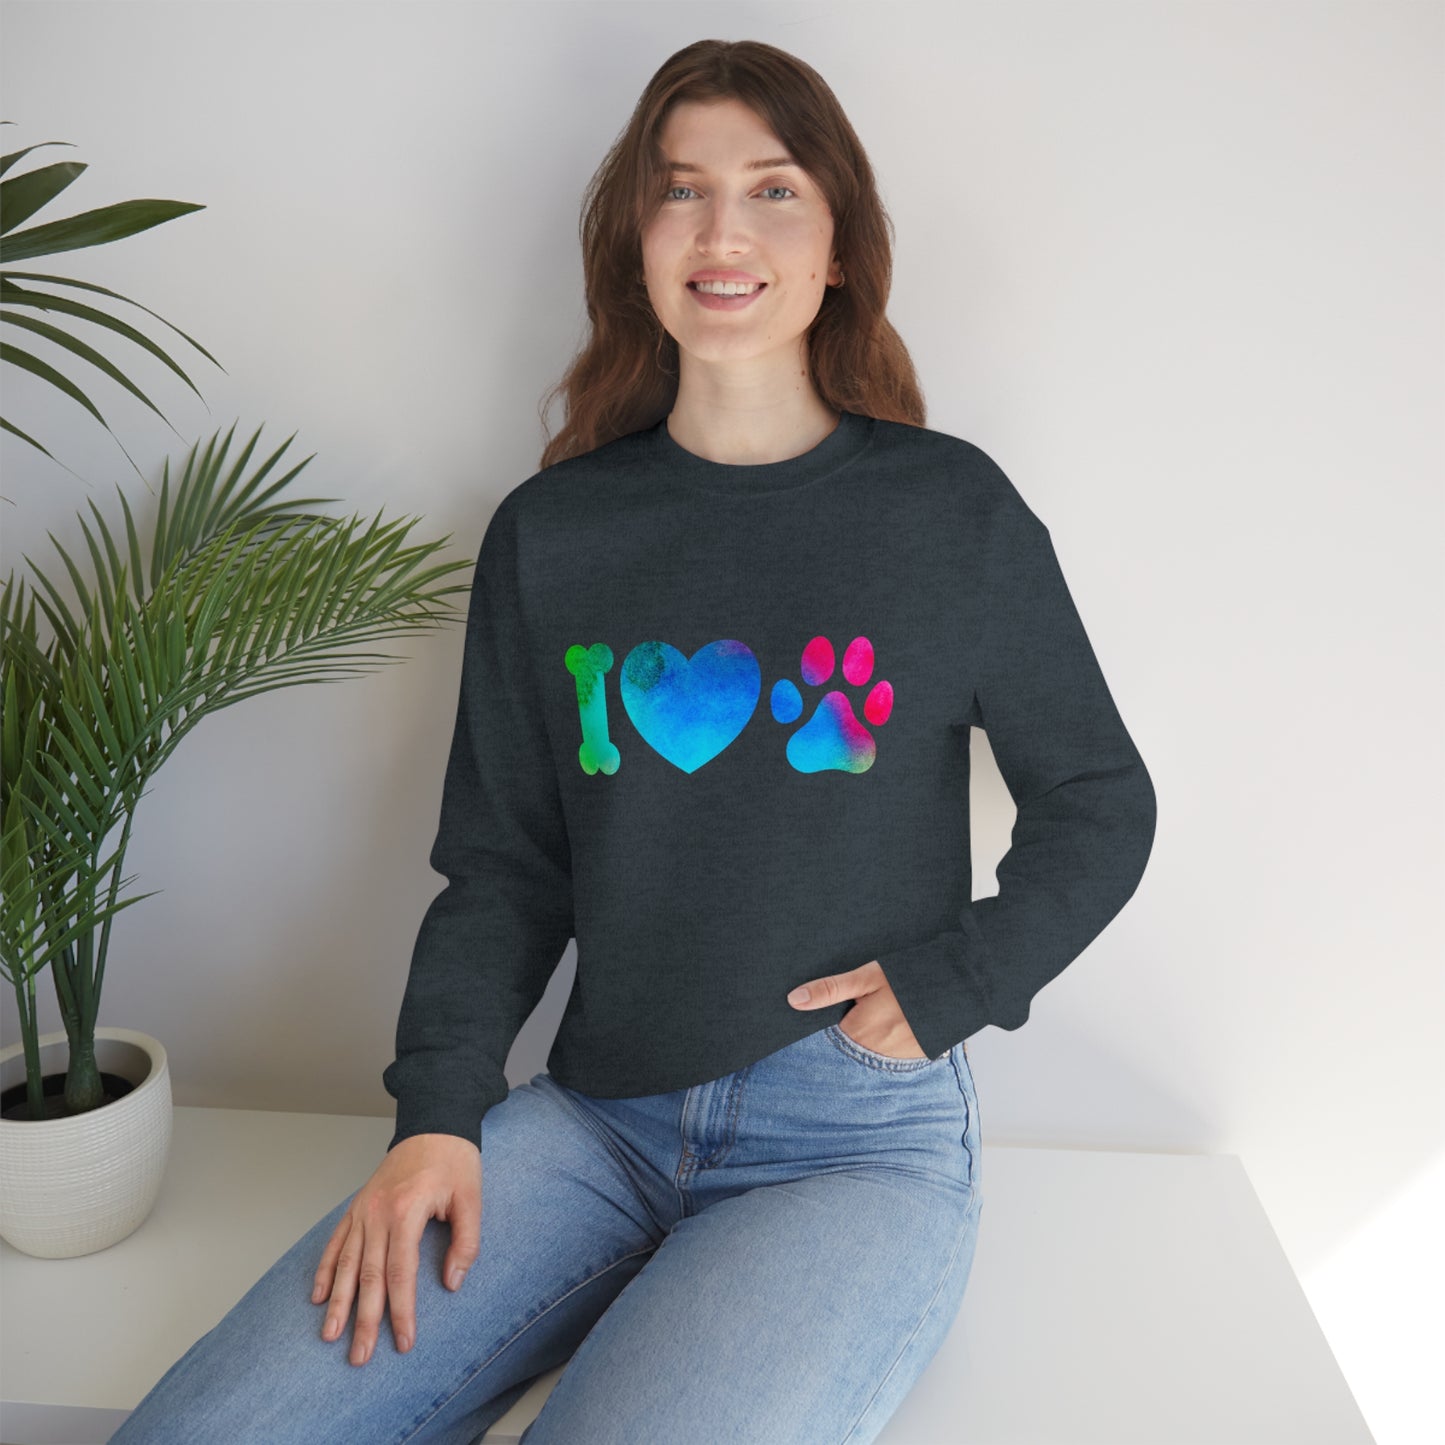 Mock up of a woman sitting on a surface and wearing the Dark Heather sweatshirt